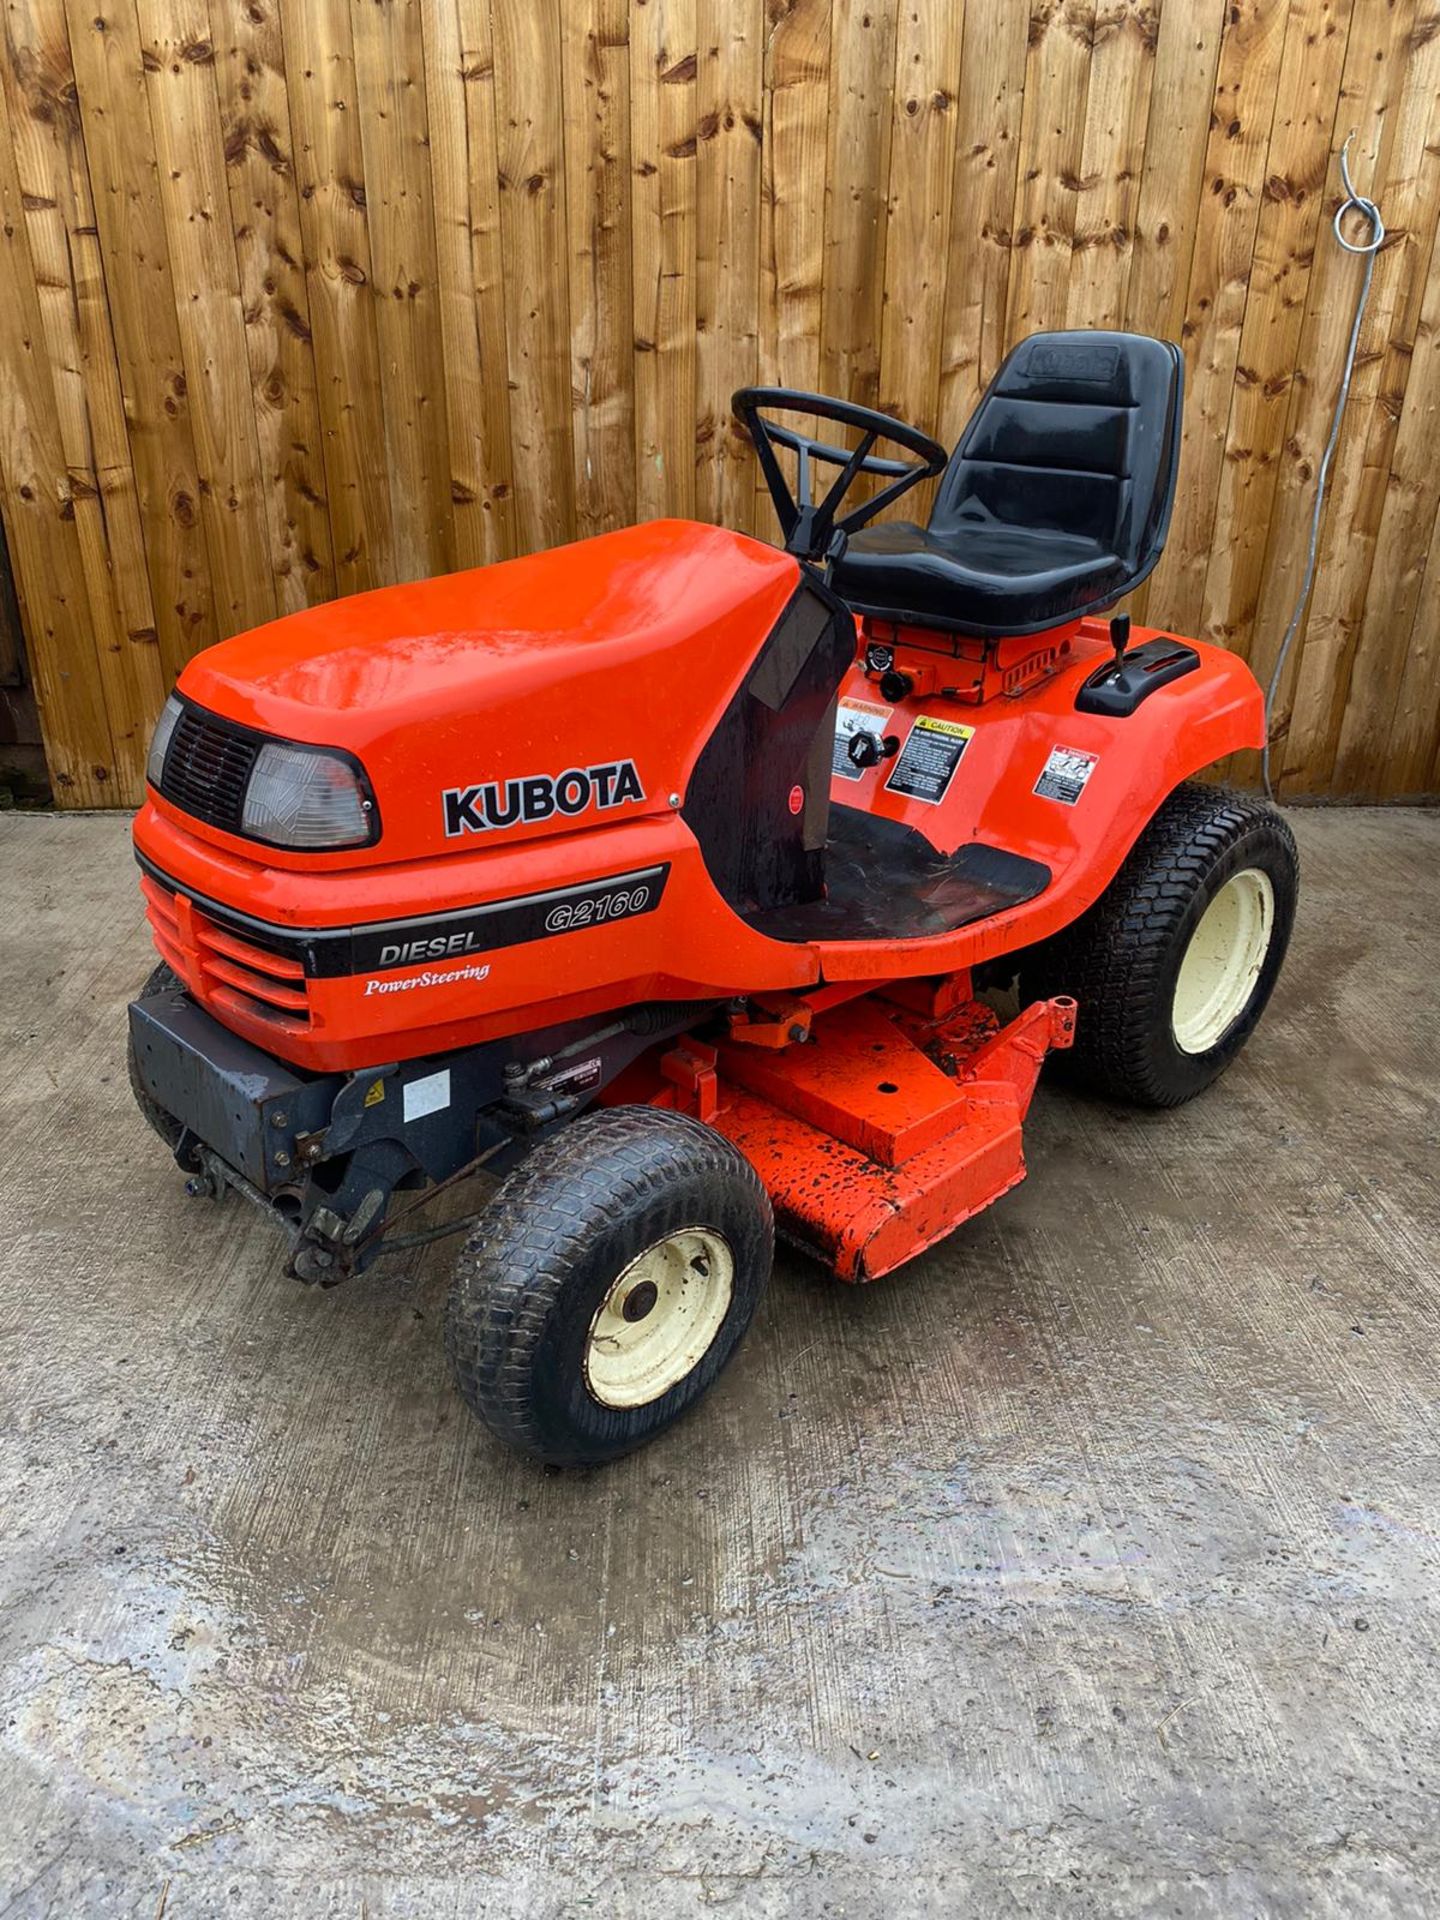 2009 KUBOTA G2160 DIESEL RIDE ON LAWN MOWER, IN EXCELLENT CONDITION *PLUS VAT* - Image 2 of 4